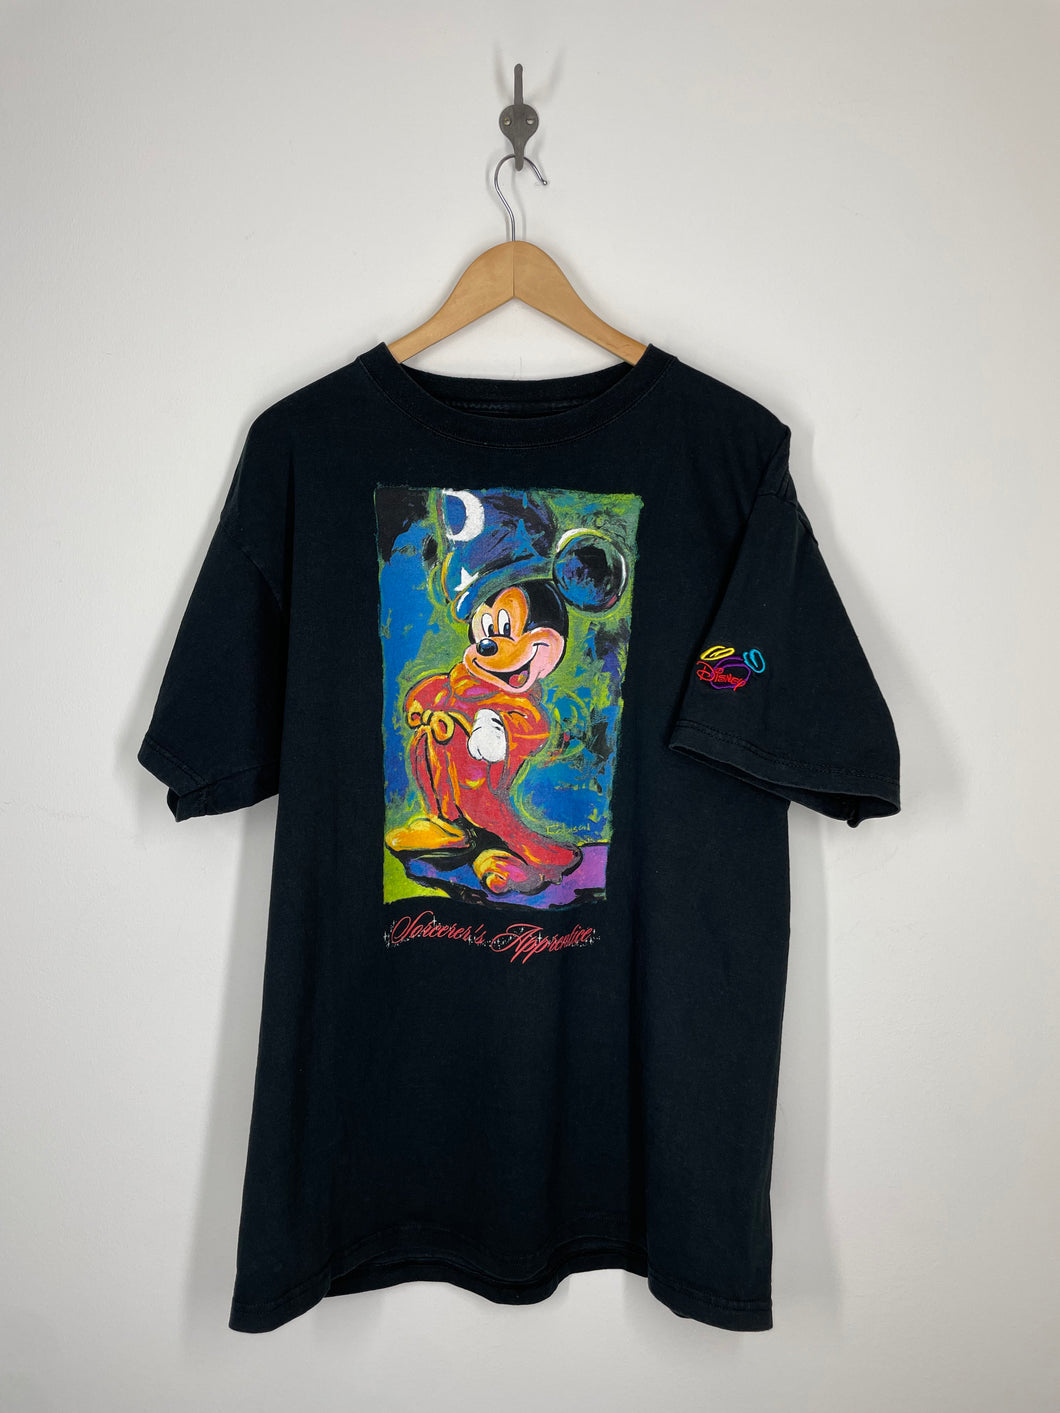 Mickey Mouse Sorcerer’s Apprentice T Shirt - The Art of Disney XL